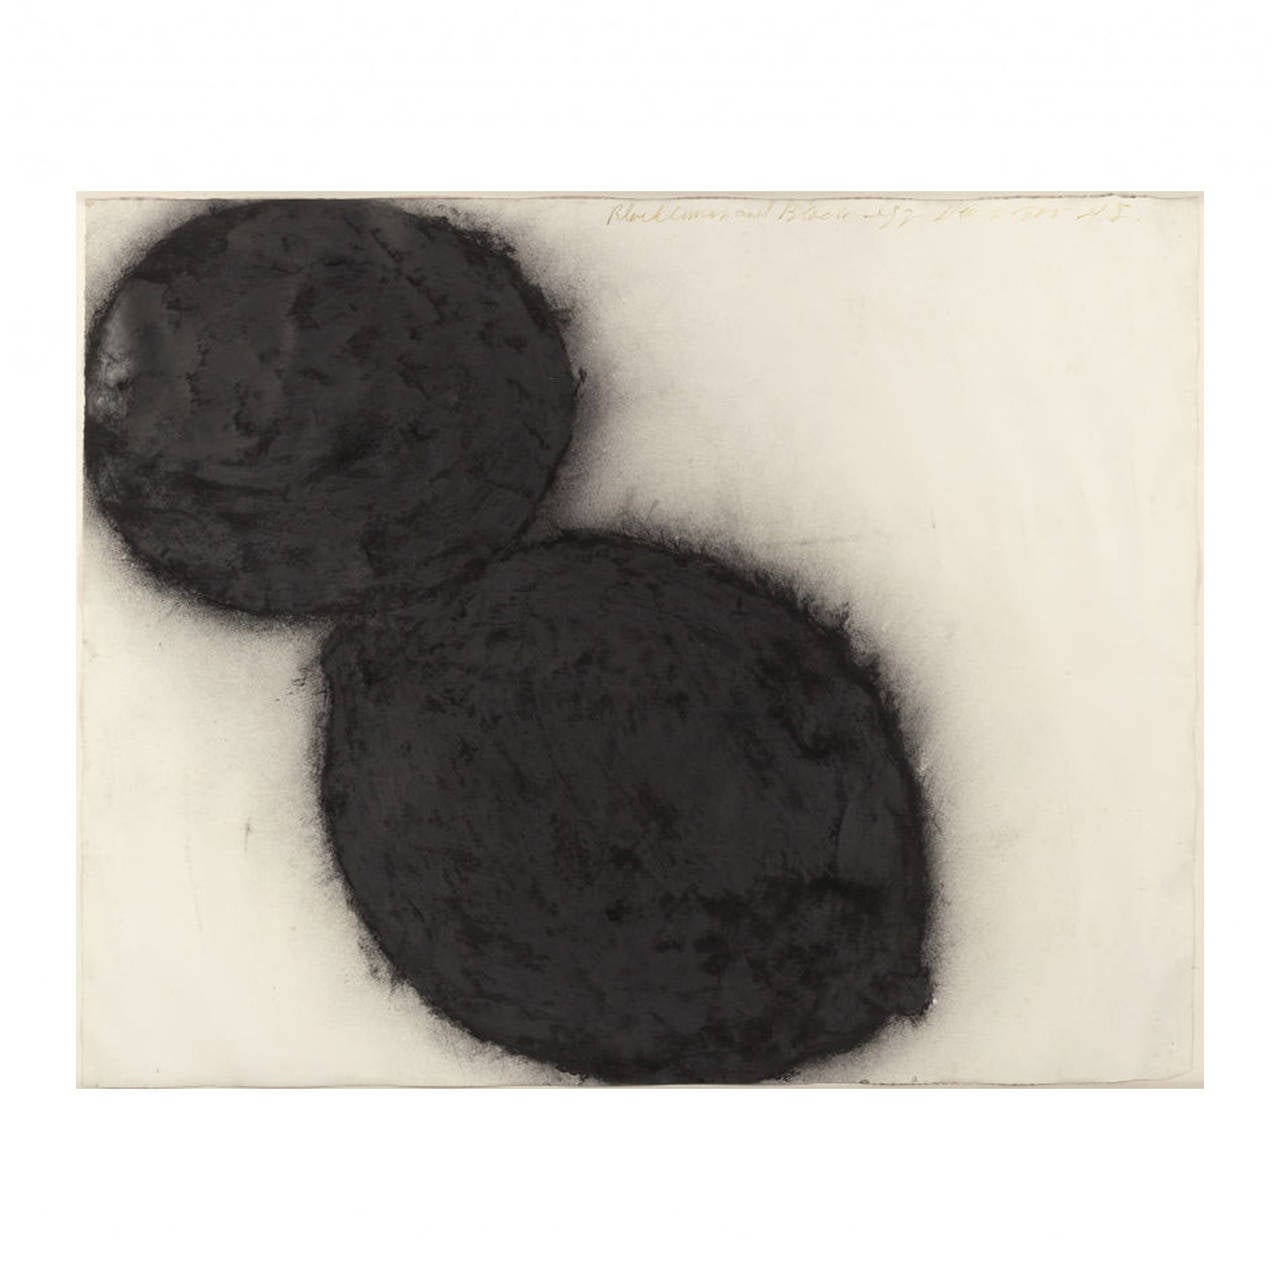 Donald Sultan (American, b. 1951).
Black Lemon and Black Egg, 1988.
Charcoal on paper.
Dimensions: 60 x 48 inches (152.4 x 121.9 cm).
Signed, titled and dated upper right: Black Lemon and Black Egg Dec 4 1988 D.S.